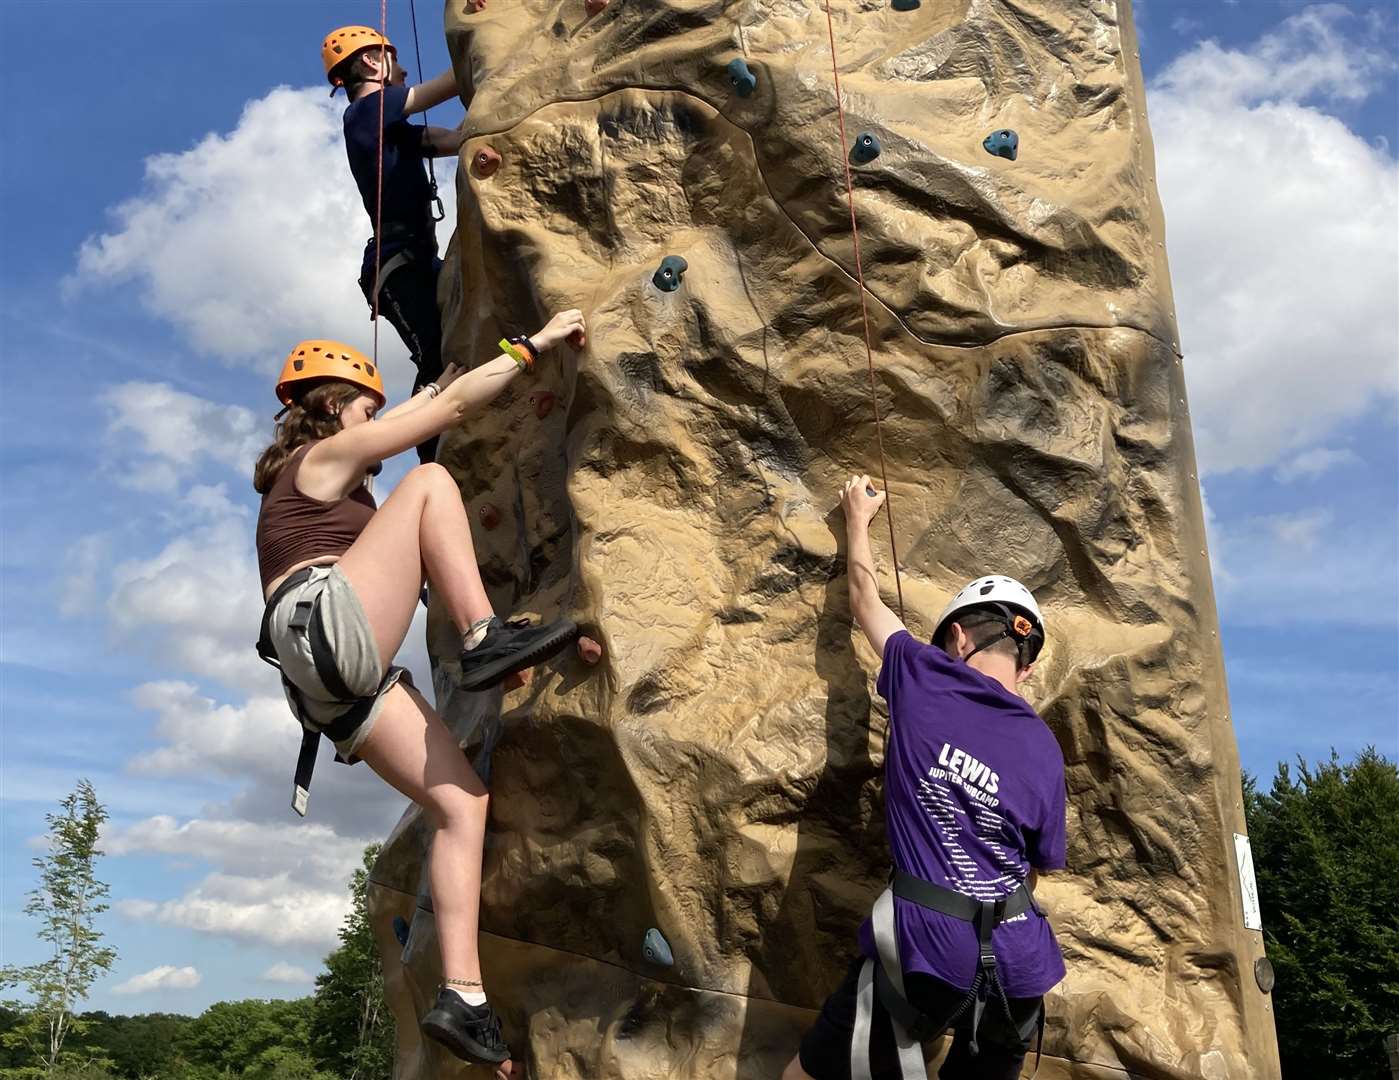 Youngsters were able to try their hand at rock climbing